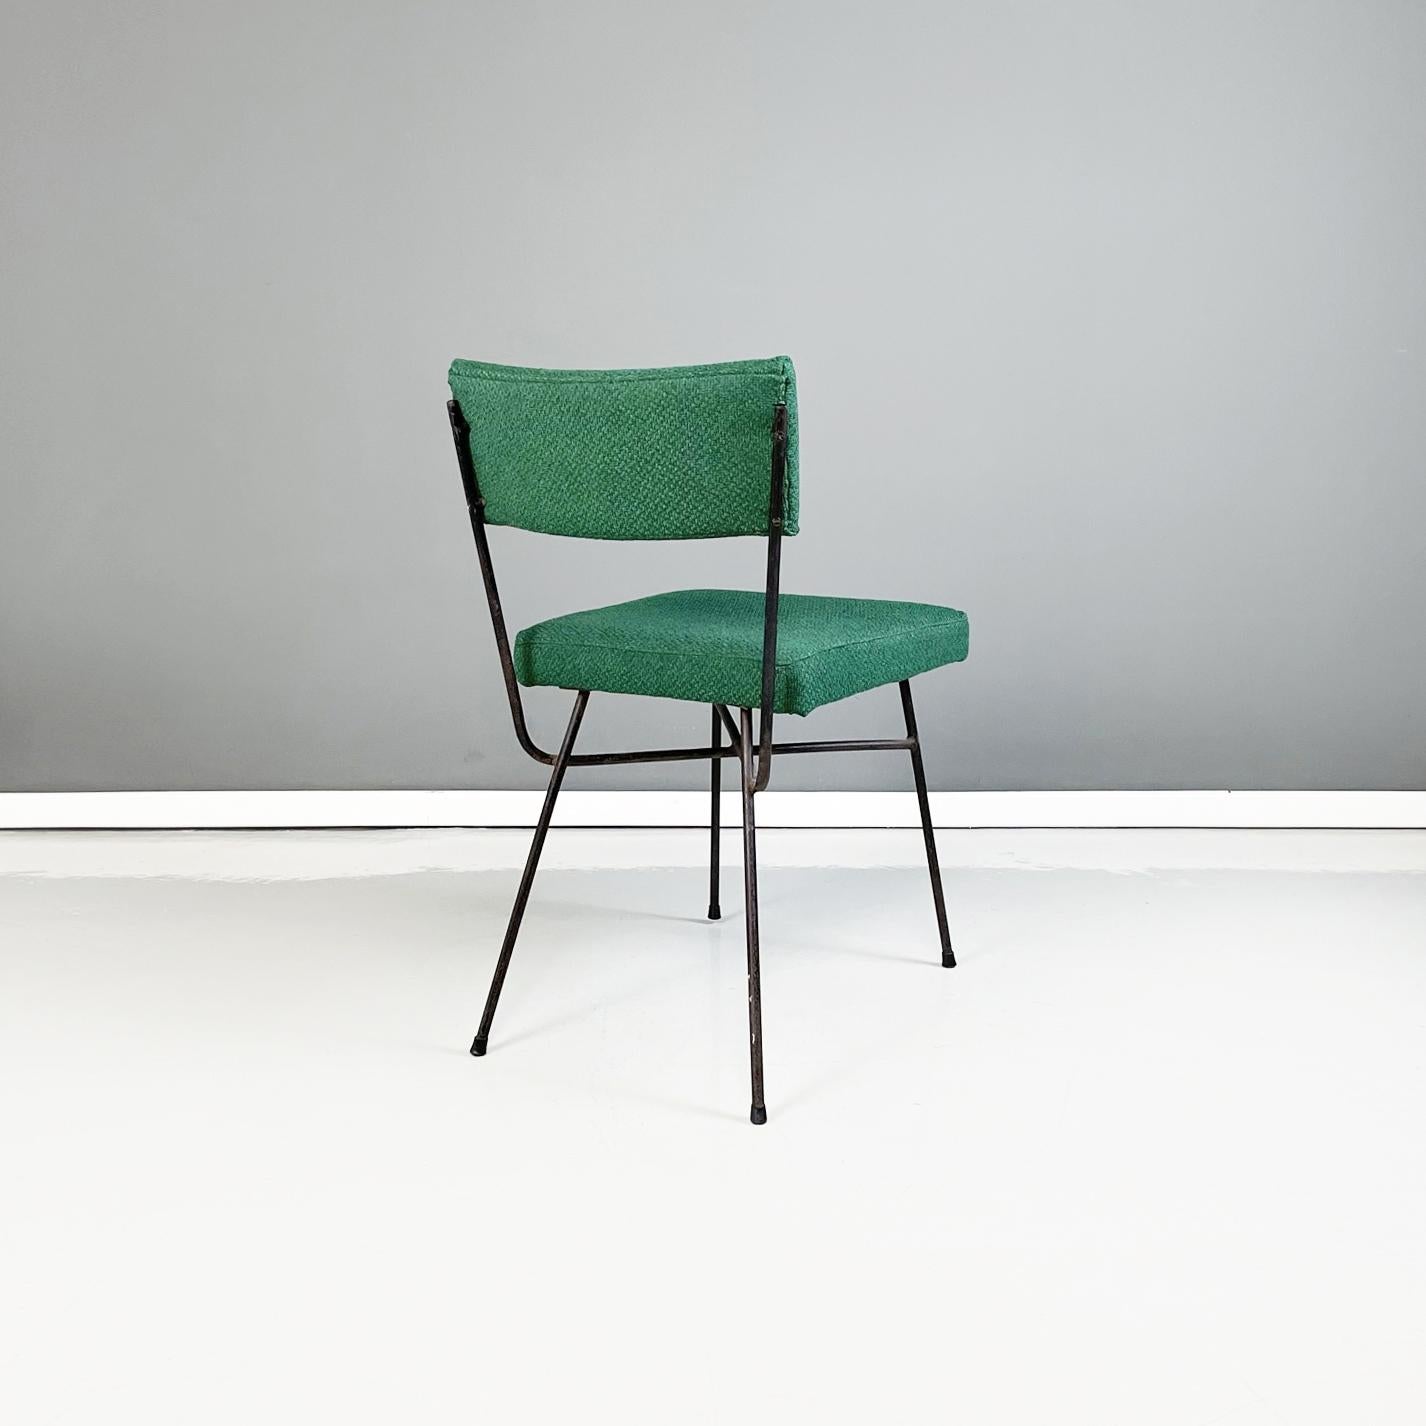 Italian Mid-Century Green Fabric Chair Elettra by Studio BBPR for Arflex, 1960s In Good Condition For Sale In MIlano, IT